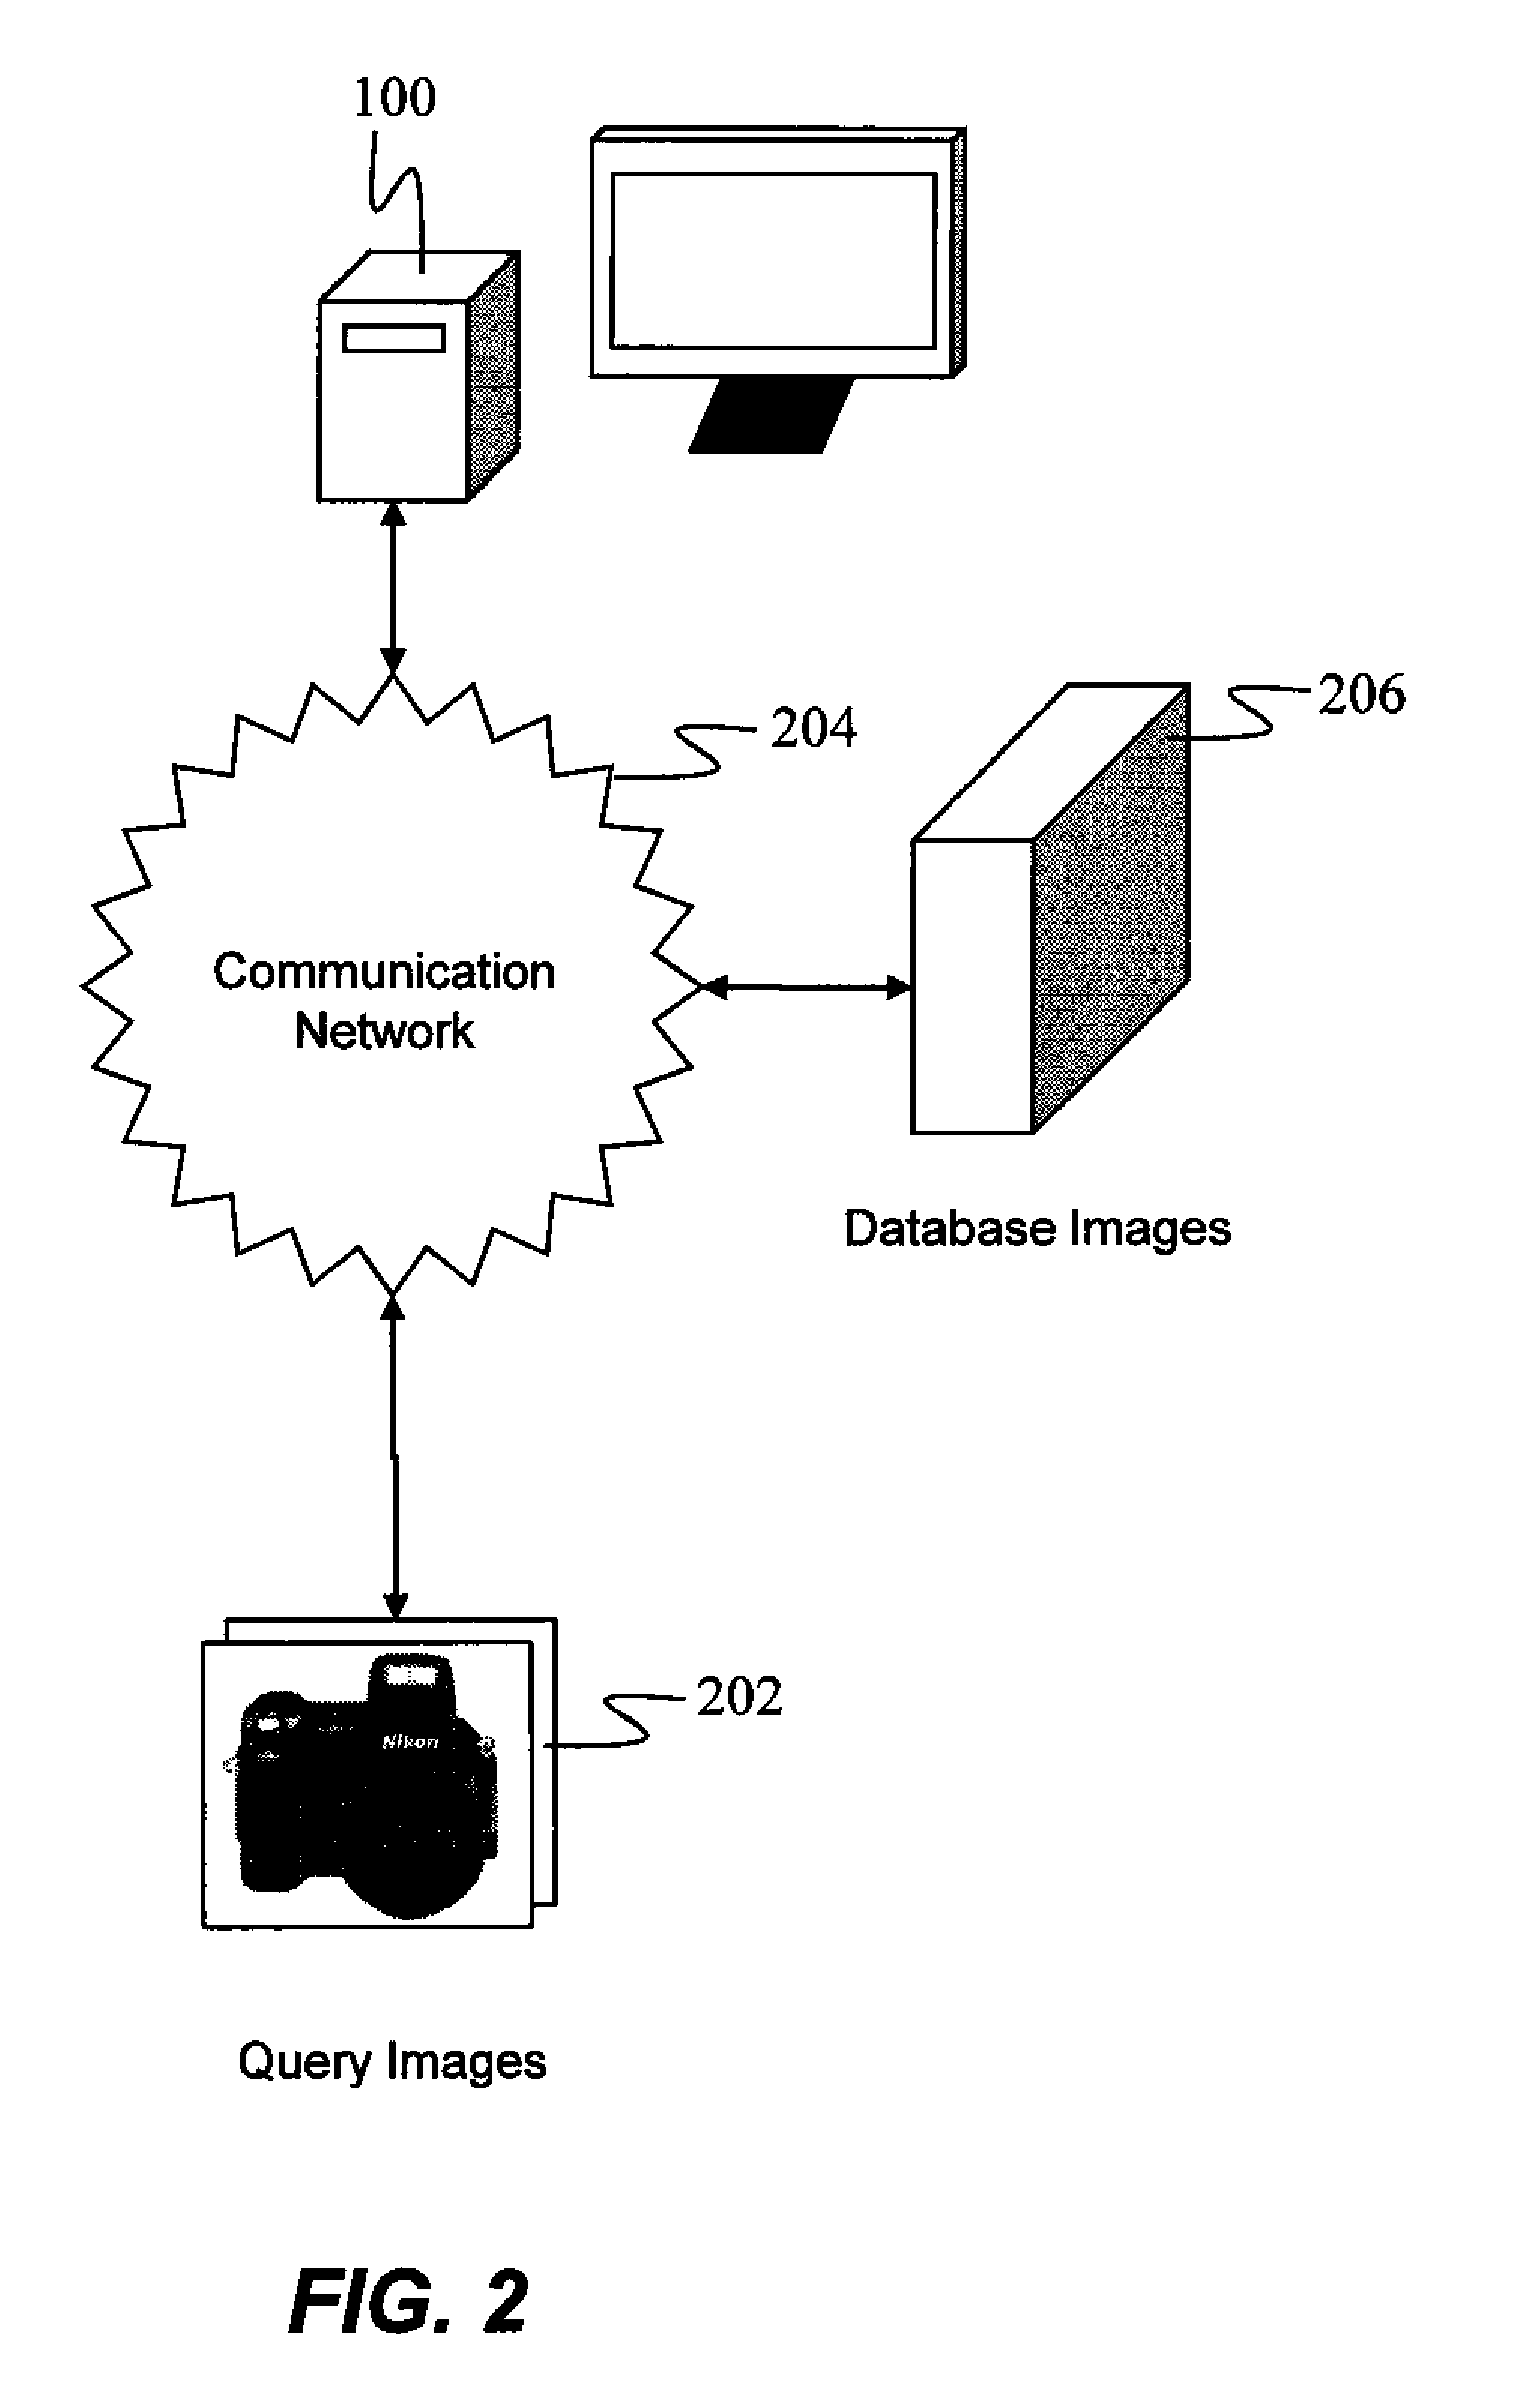 Method for searching a database using query images and an image anchor graph-based ranking algorithm